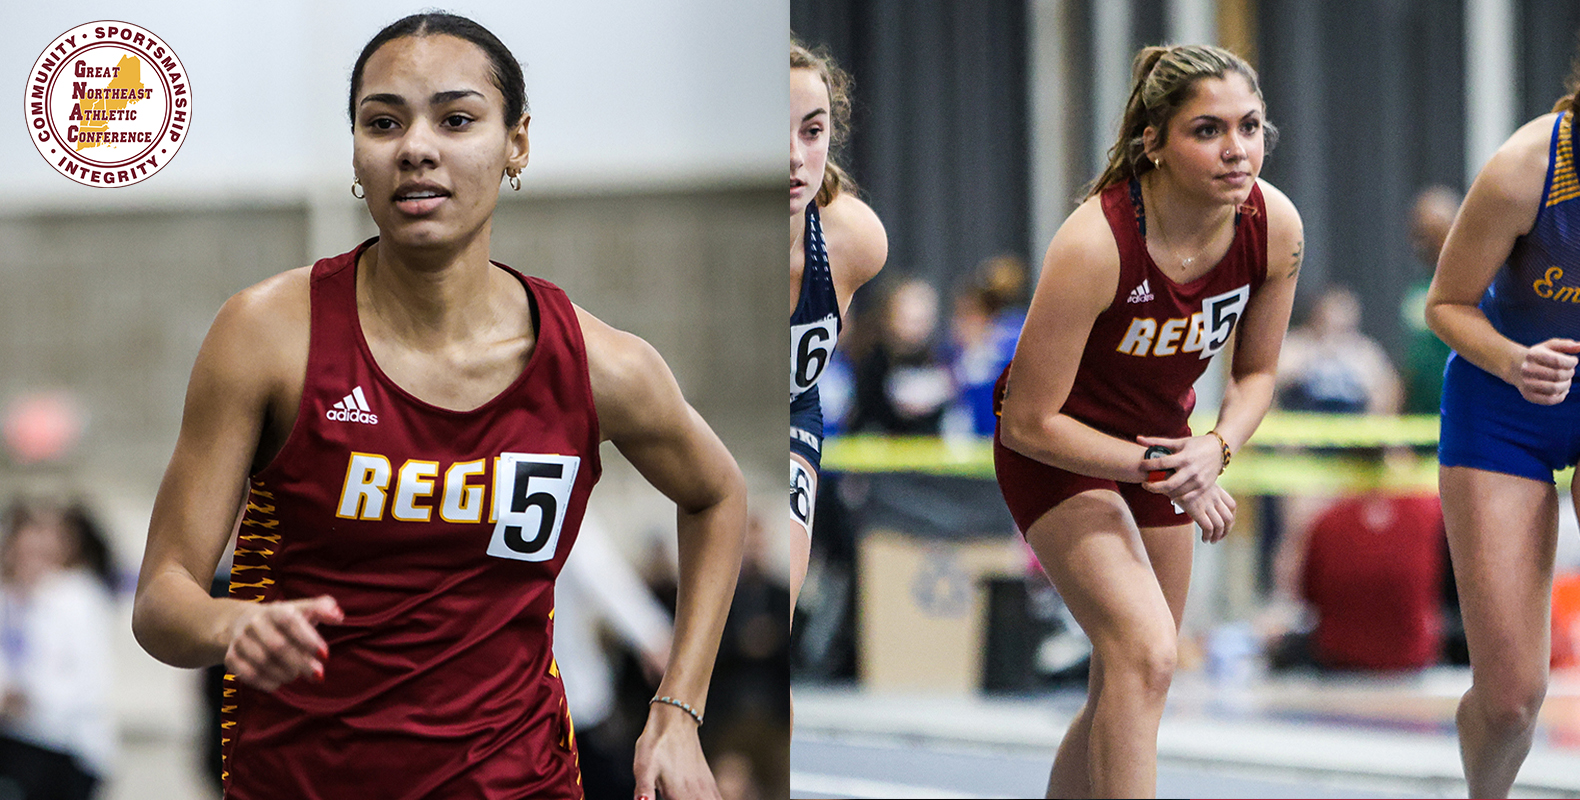 Amasa-Titus, Charest Receive GNAC Indoor Track & Field Honors